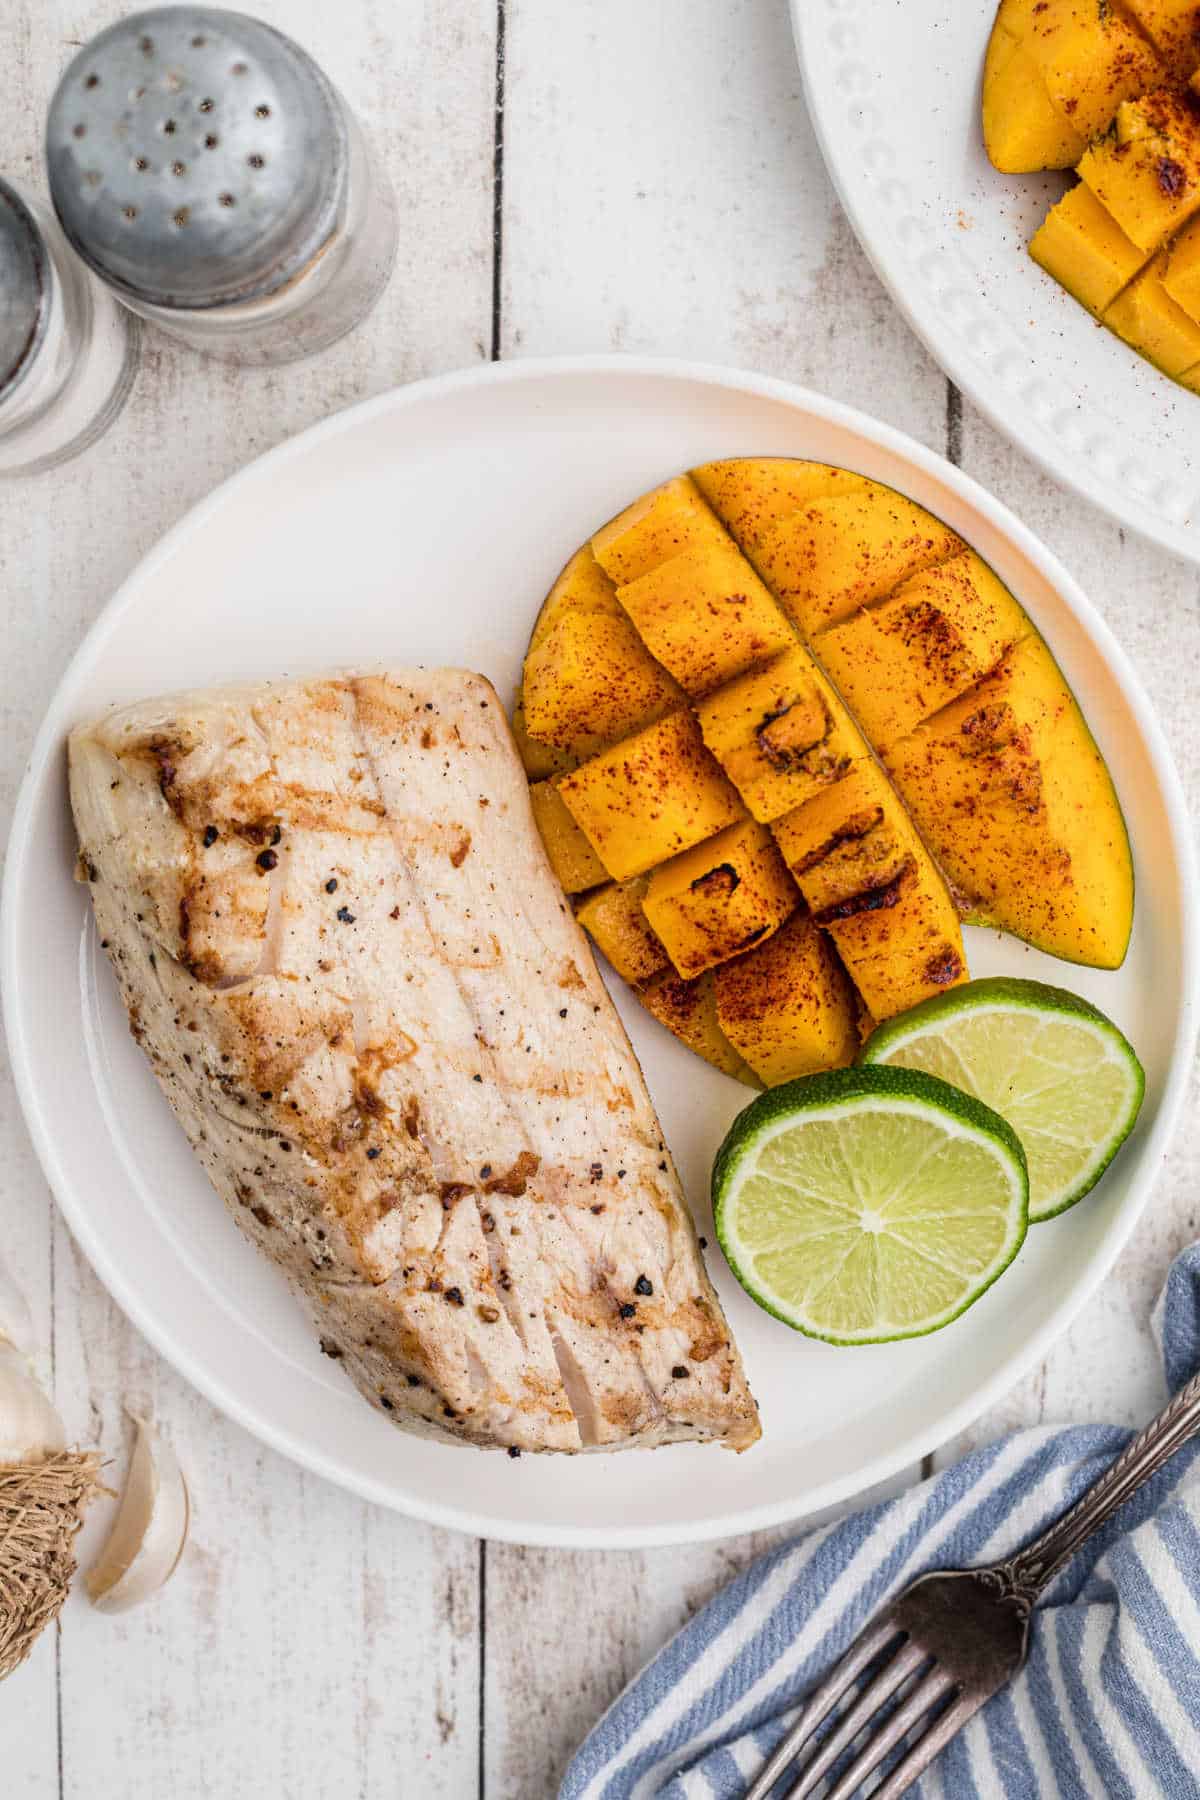 Overhead view of a plate with grilled cobia and mango with lime slices.